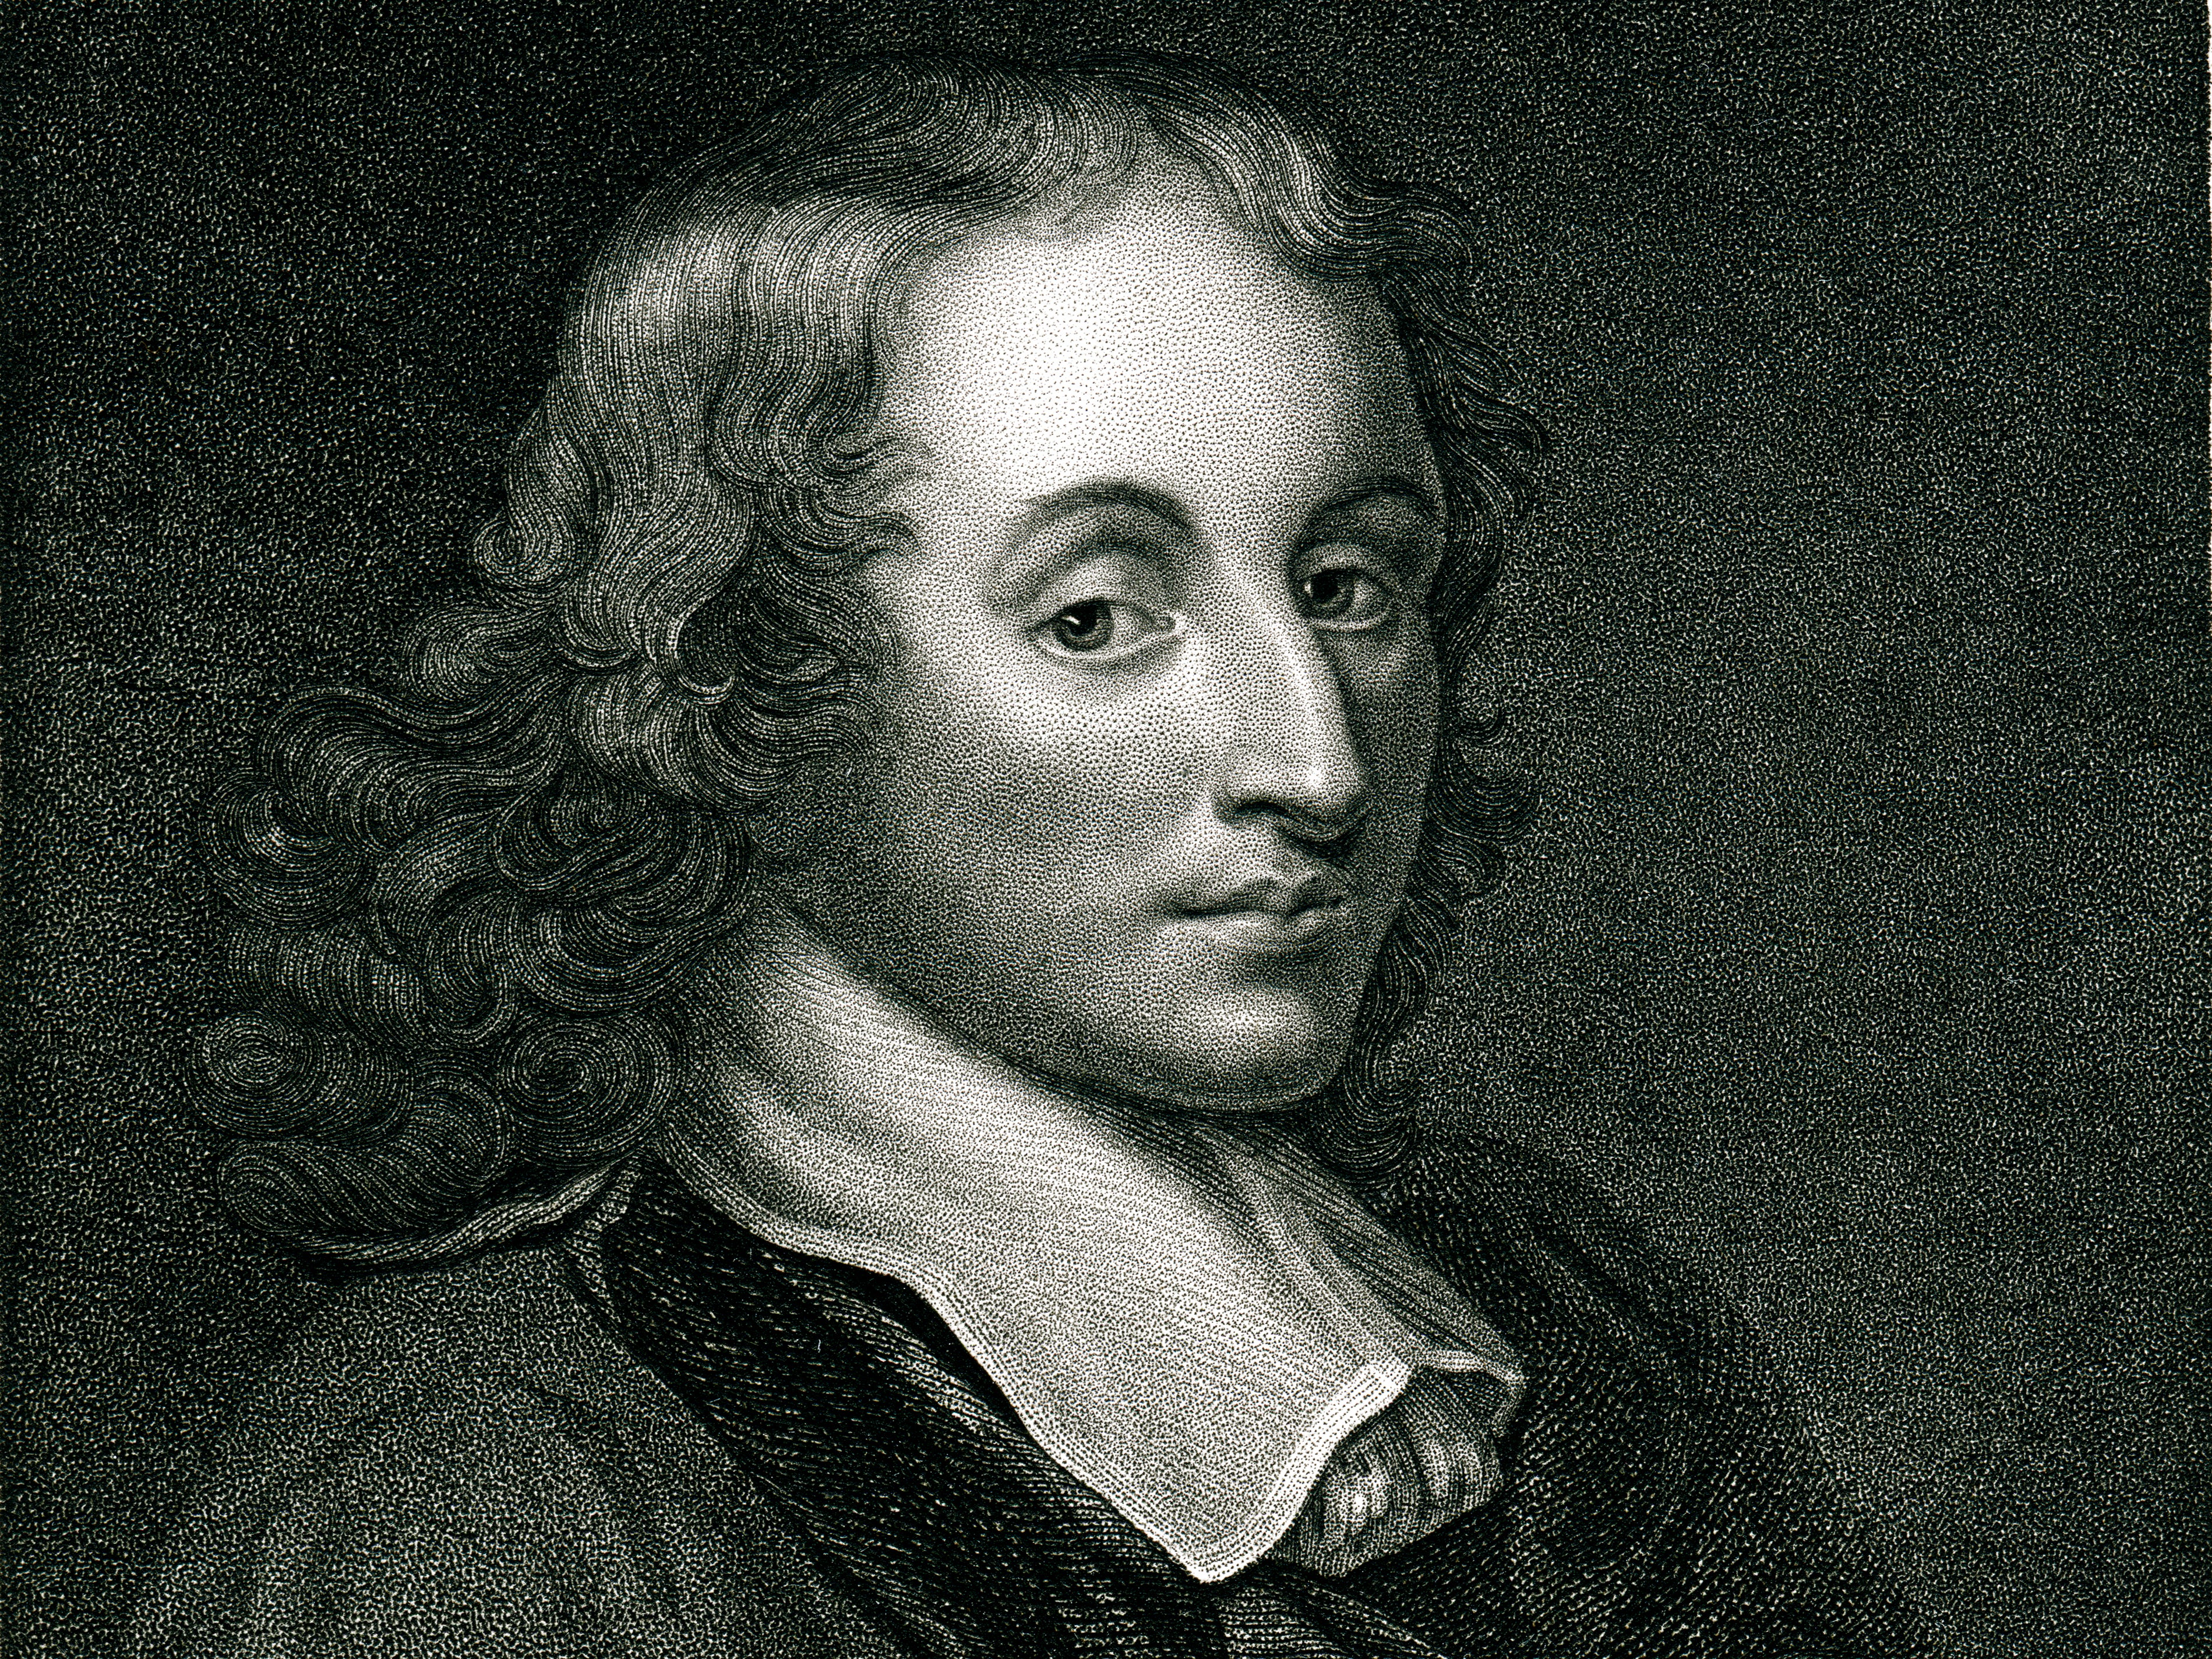 Prodigious polymath: Pascal as depicted in a contemporaneous engraving